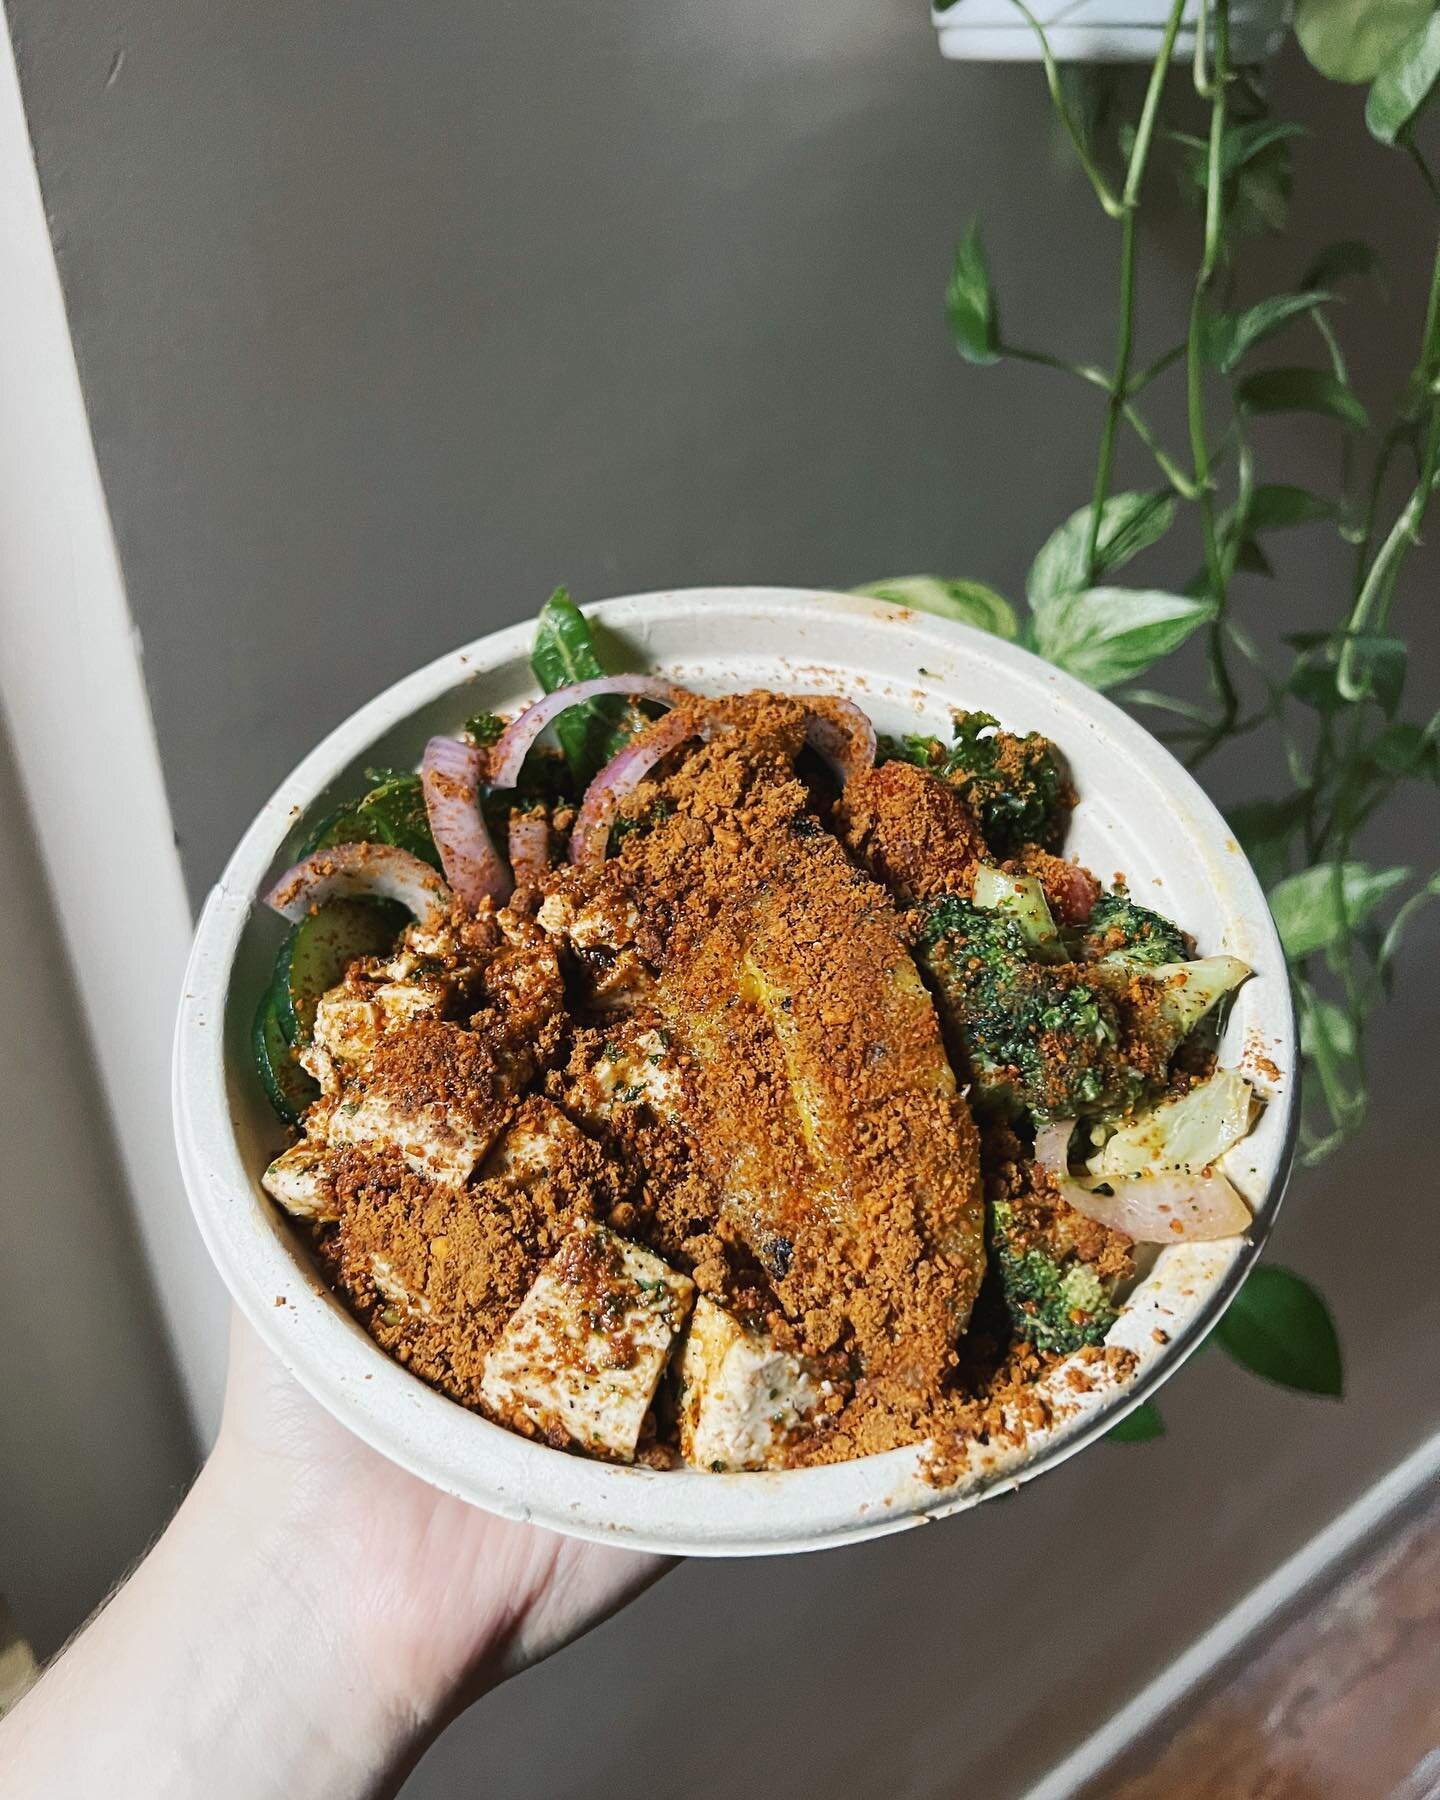 Okay New York this #companiesthatactuallygiveashit spotlight is for you 🌿 if you&rsquo;ve never been to @brooklynsuya, here&rsquo;s your push to go check it out ! Suya is a #BlackOwned restaurant in Crown Heights making delicious West African bowls.